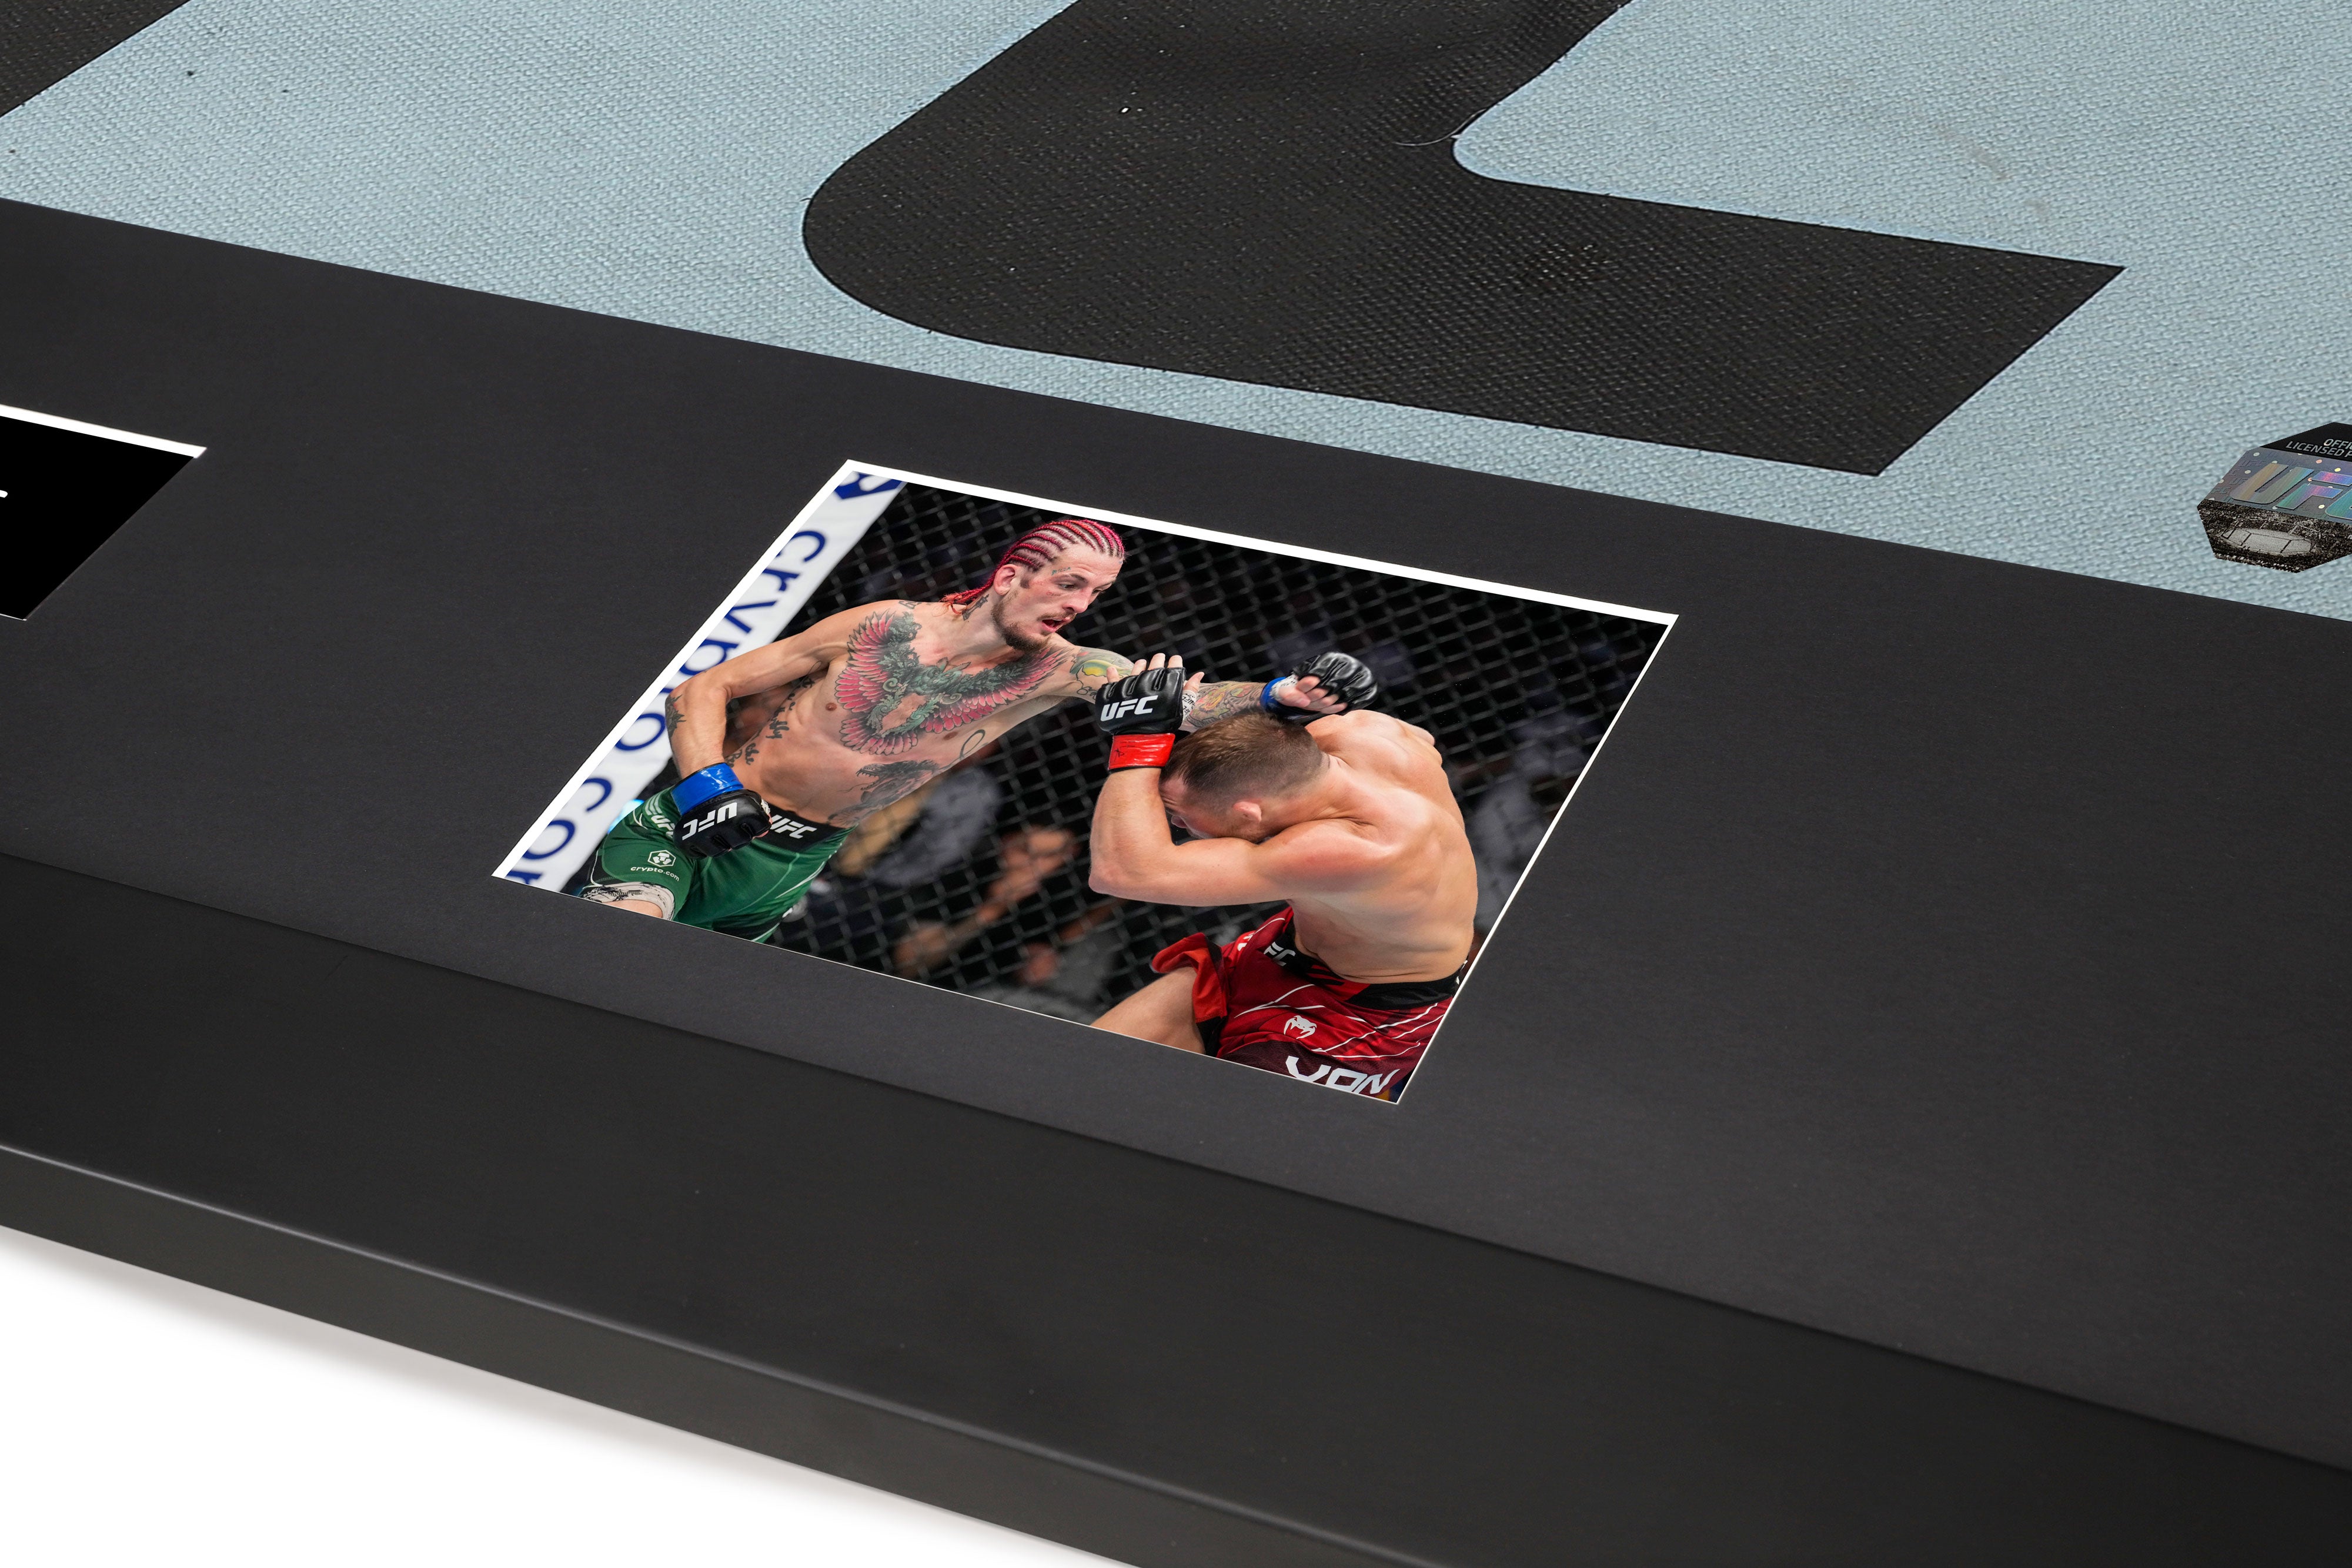 UFC Logo Canvas & Photo Signed by Sean O'Malley UFC 280: Oliveira vs Makhachev